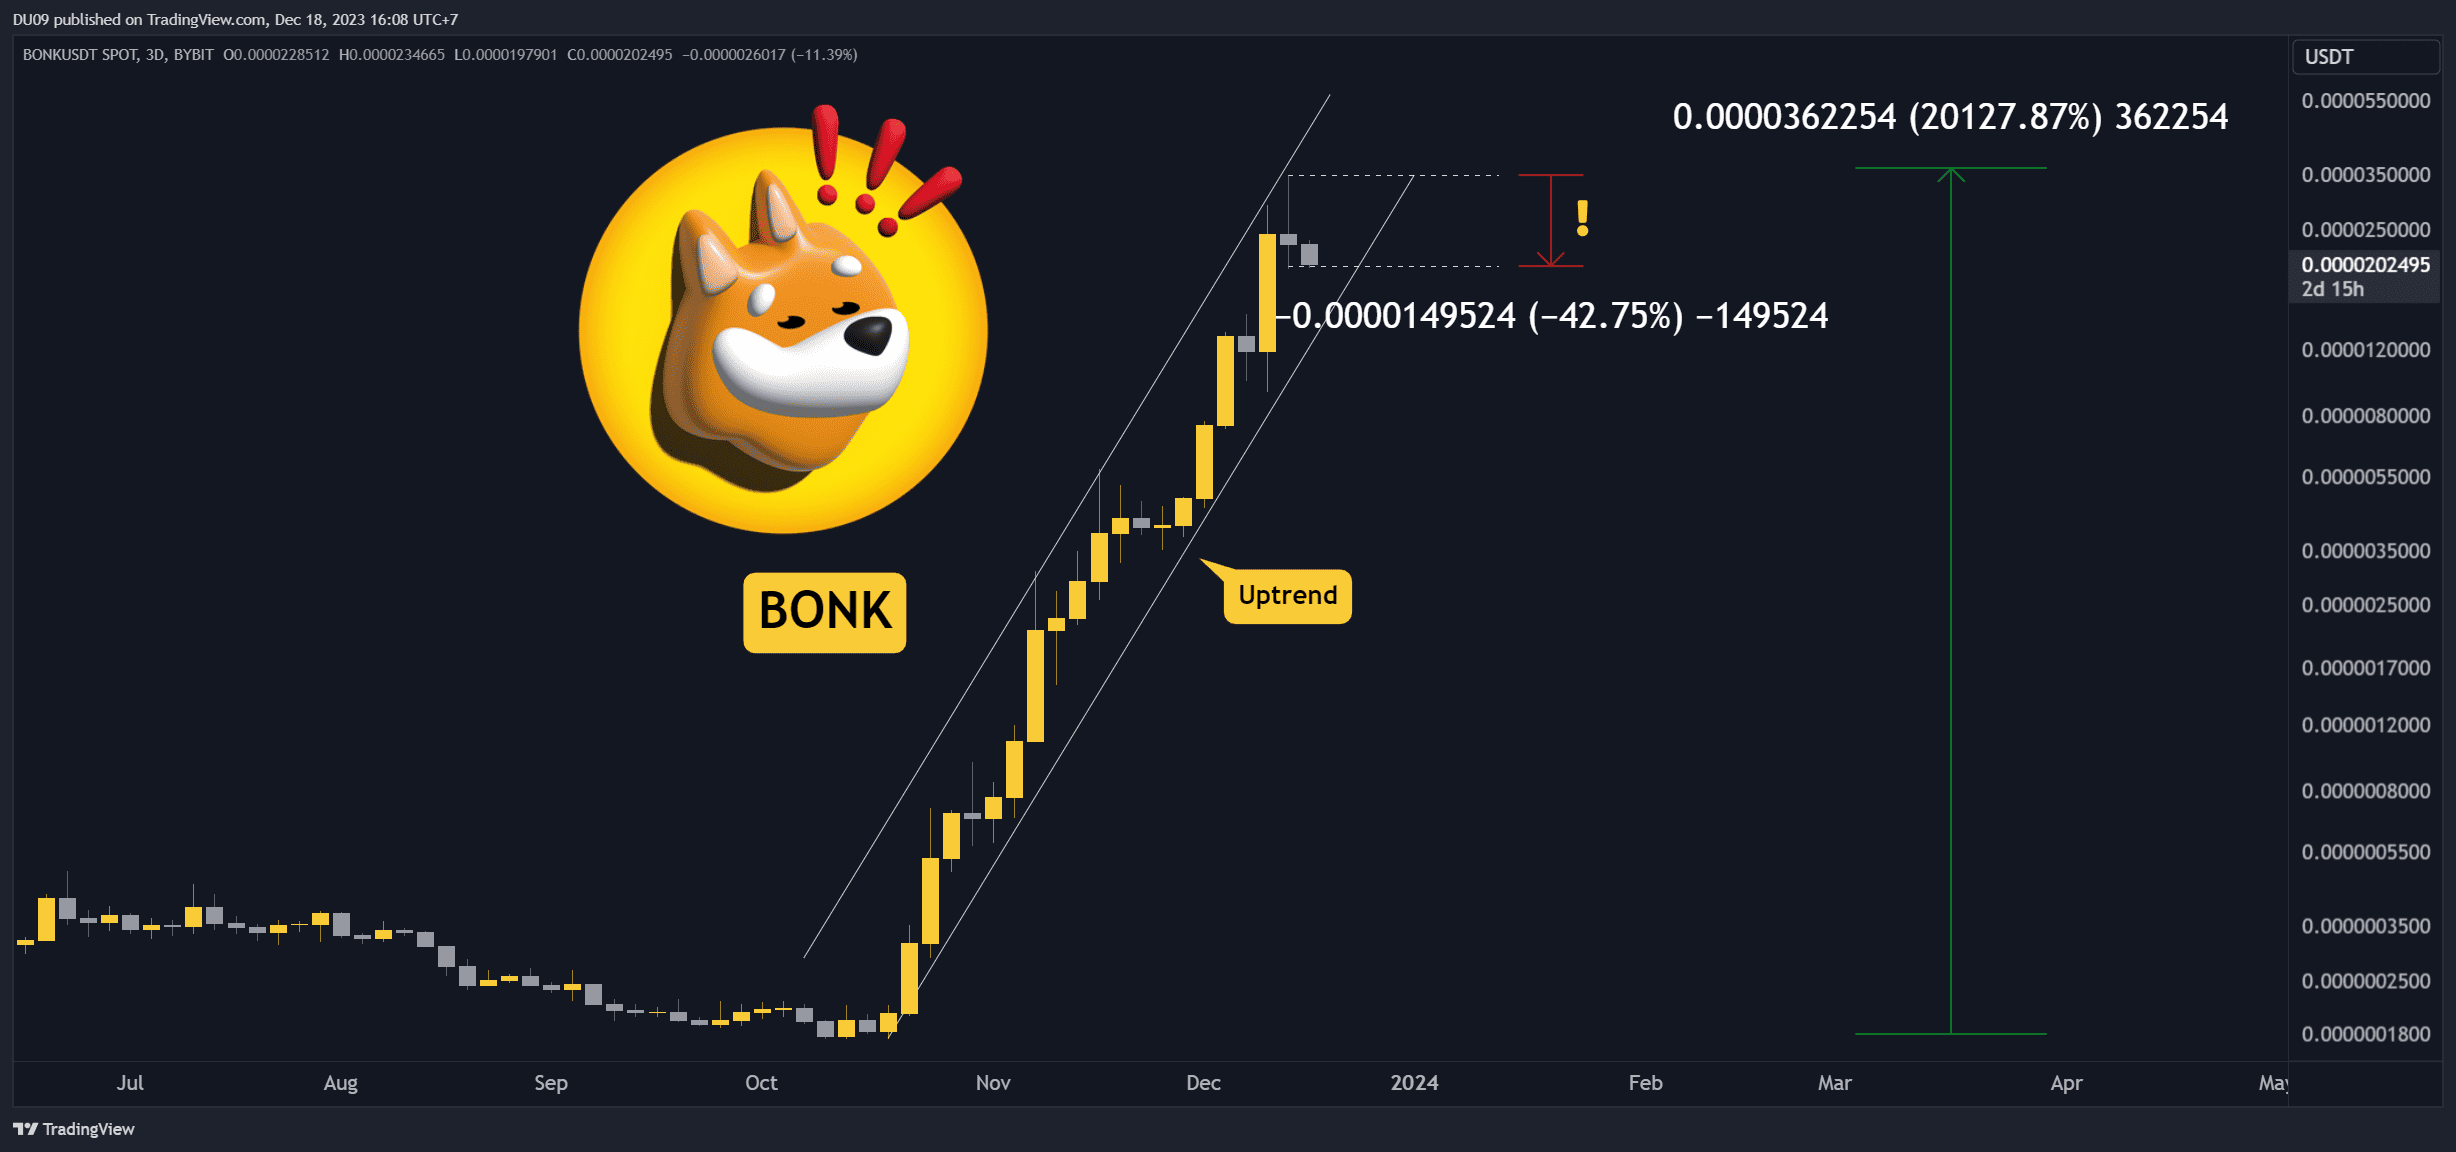 What’s-going-on-with-the-bonk-meme-coin-and-is-the-hype-over?-3-things-to-watch-(bonk-price-analysis)